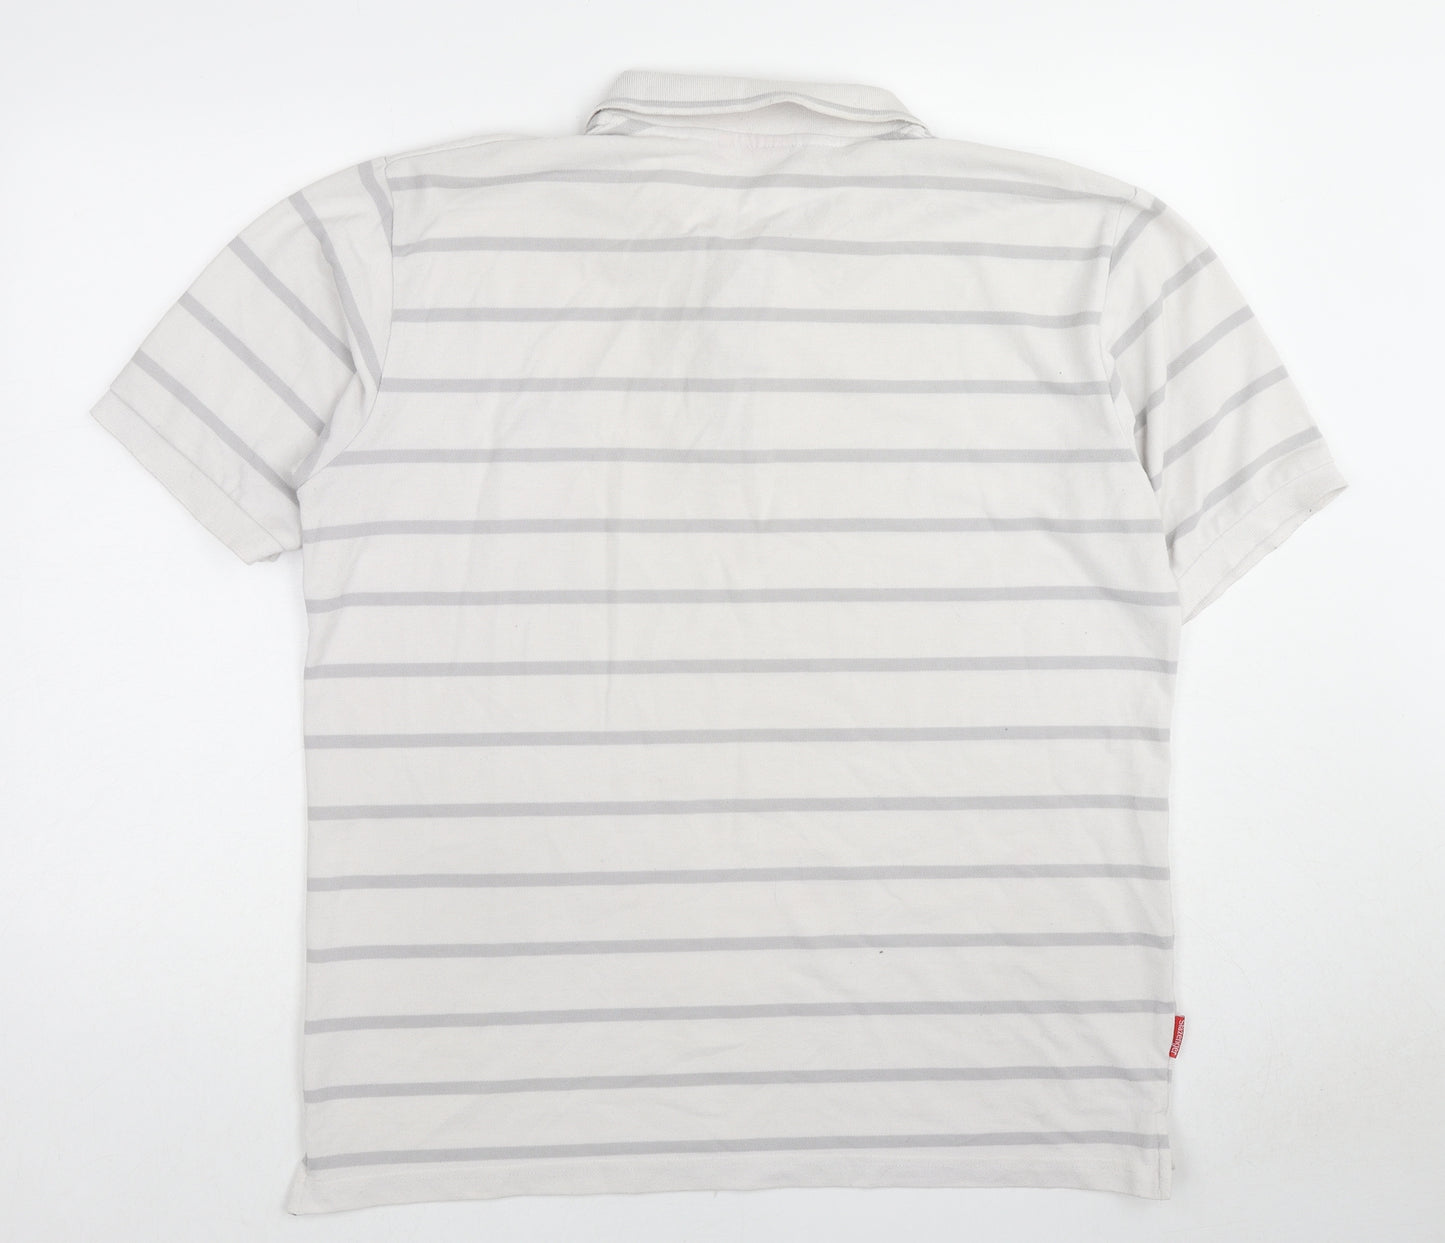 Slazenger Mens Ivory Striped Cotton Polo Size 2XL Collared Pullover